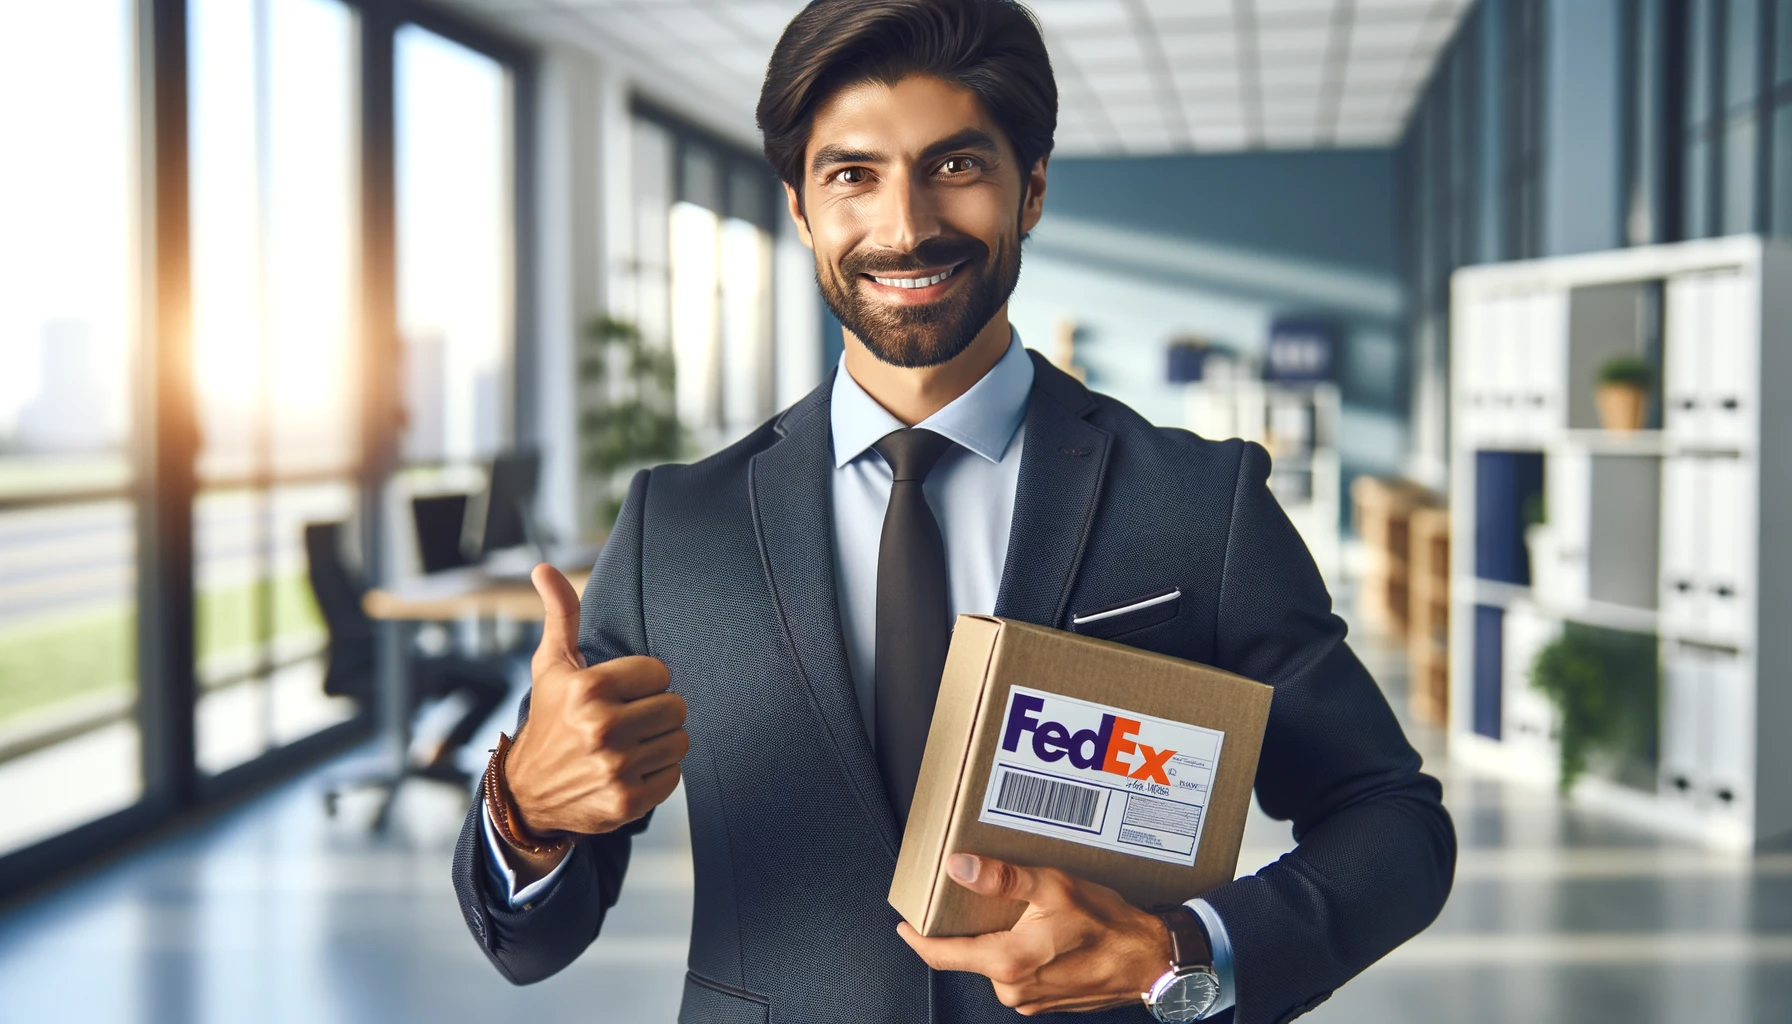 DALL·E 2023-11-23 05.59.12 - A high-quality, realistic photo-style image showing a confident business professional, a South Asian man, standing in an office setting. He is holding